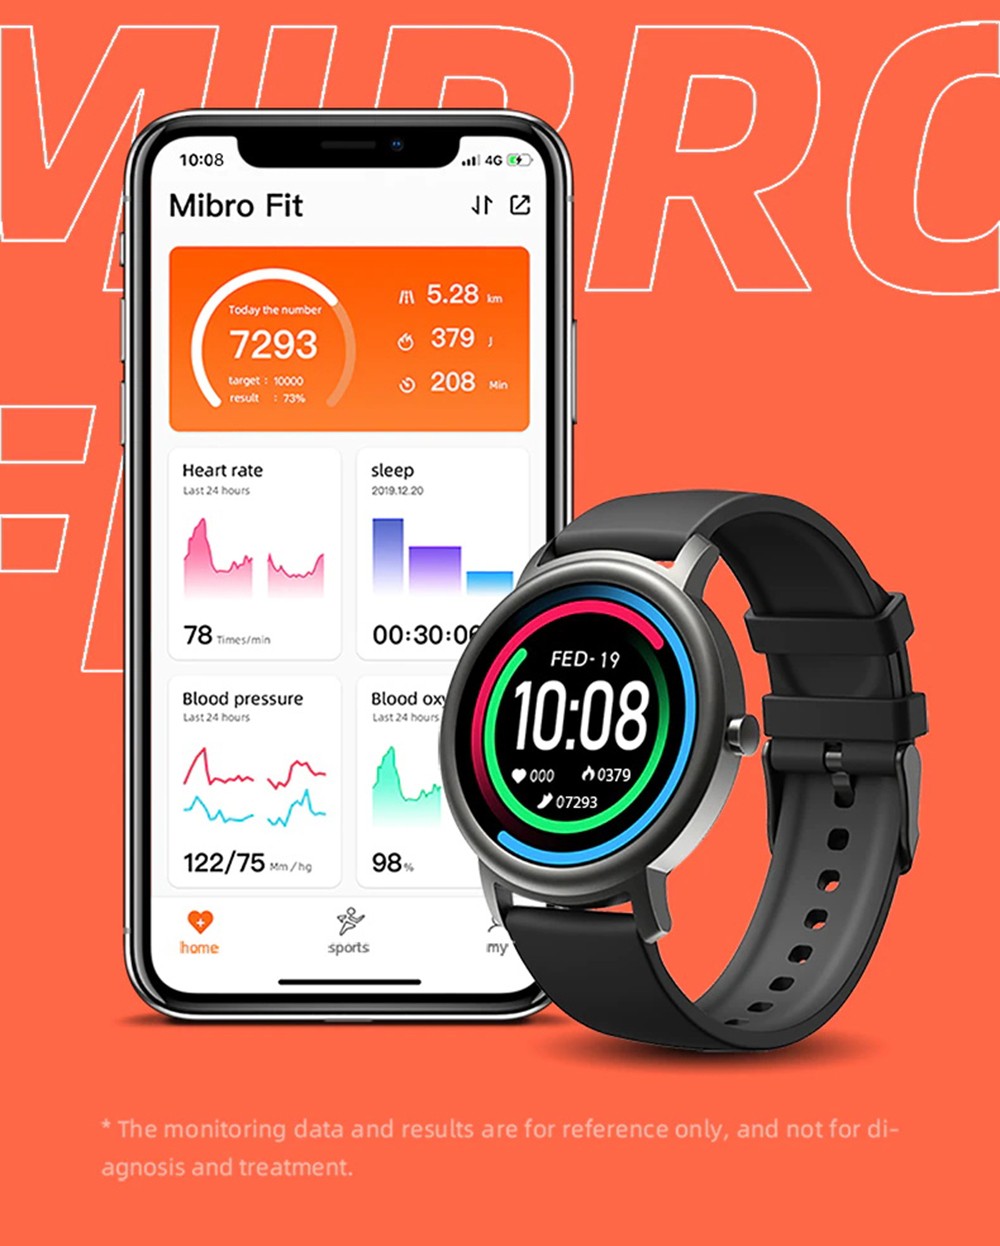 Mibro Air V5.0 Bluetooth Smartwatch 1.28 inch TFT Screen 12 Sports Modes Heart Rate Sleep Monitoring IP68 Water-Resistant 200mAh Battery 25 Days Standby Time Multi-language - Silver